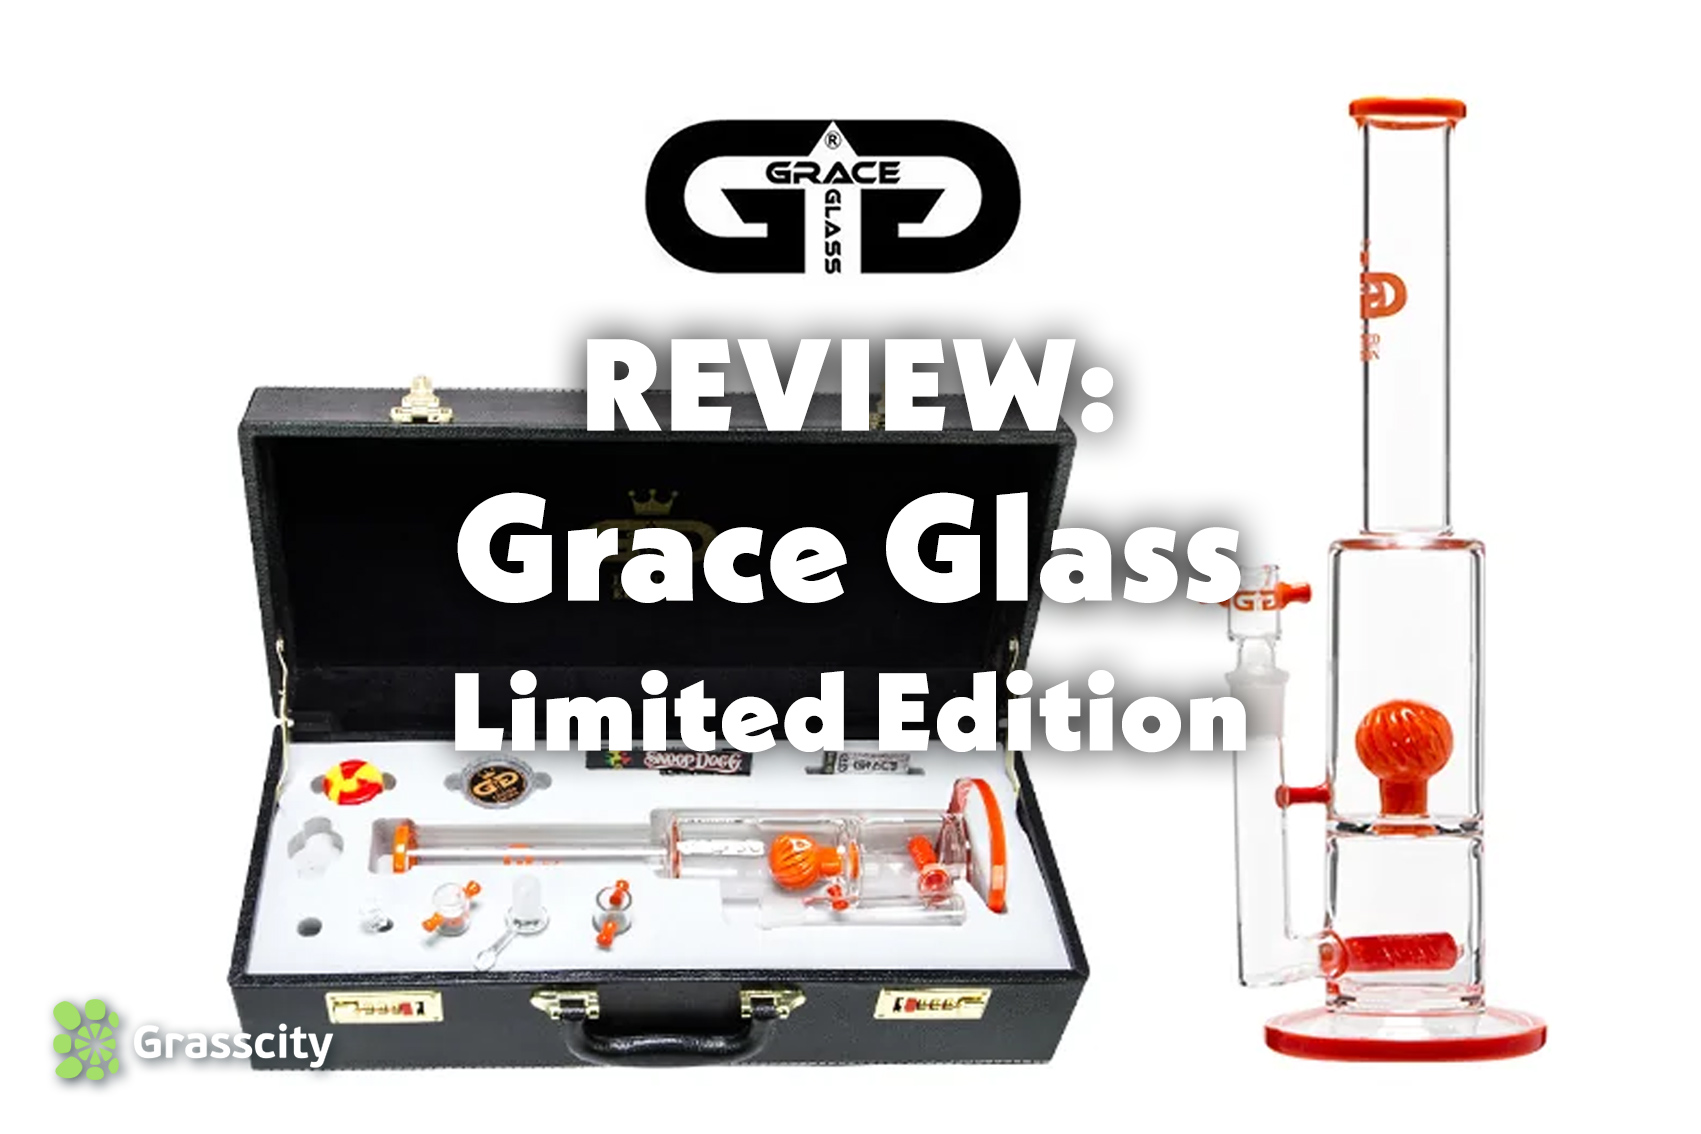 REVIEW: Grace Glass Limited Edition